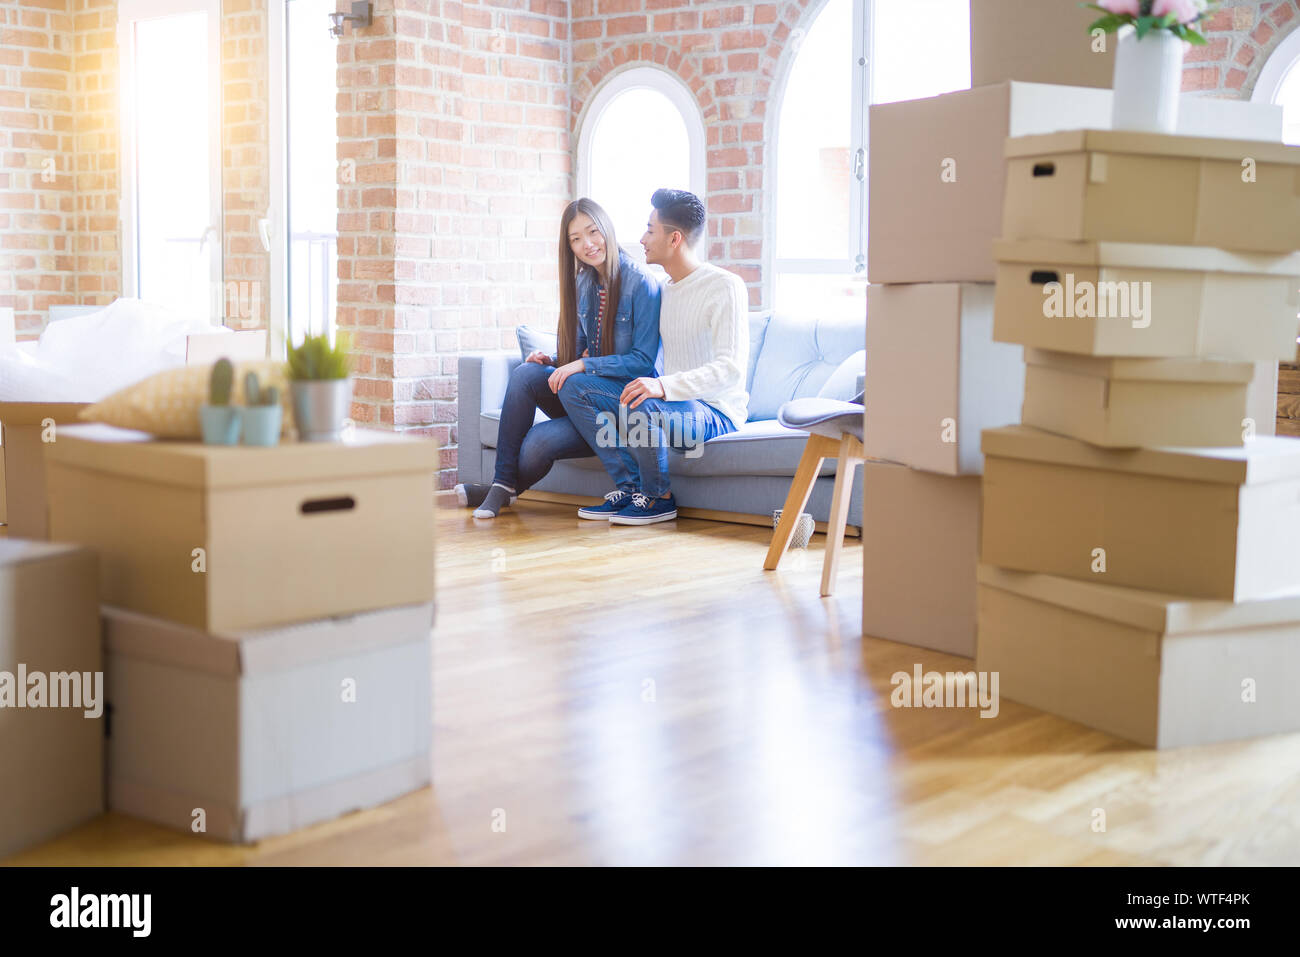 Beautiful young asian couple relaxing together sitting on the sofa arround cardboard boxes, happy moving to a new house Stock Photo